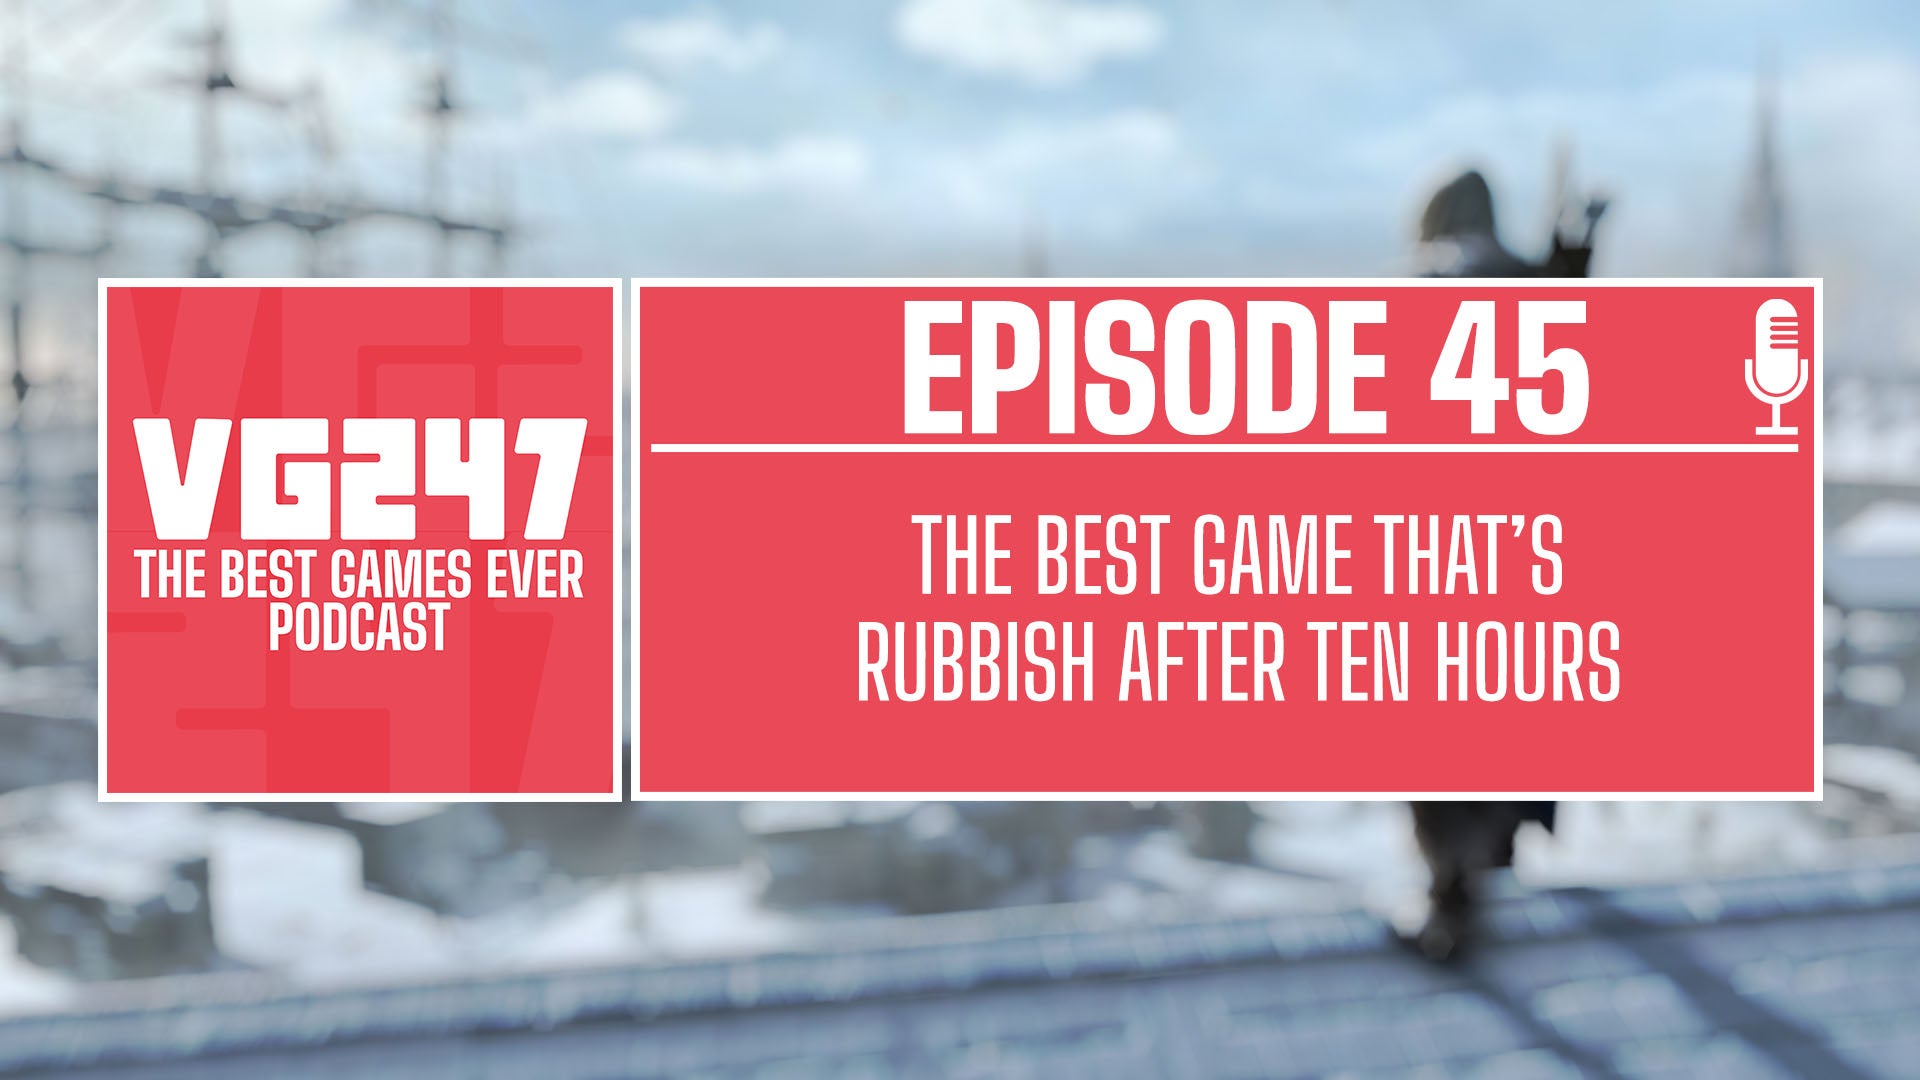 VG247’s The Best Games Ever Podcast – Ep.45: The best game that’s rubbish after ten hours